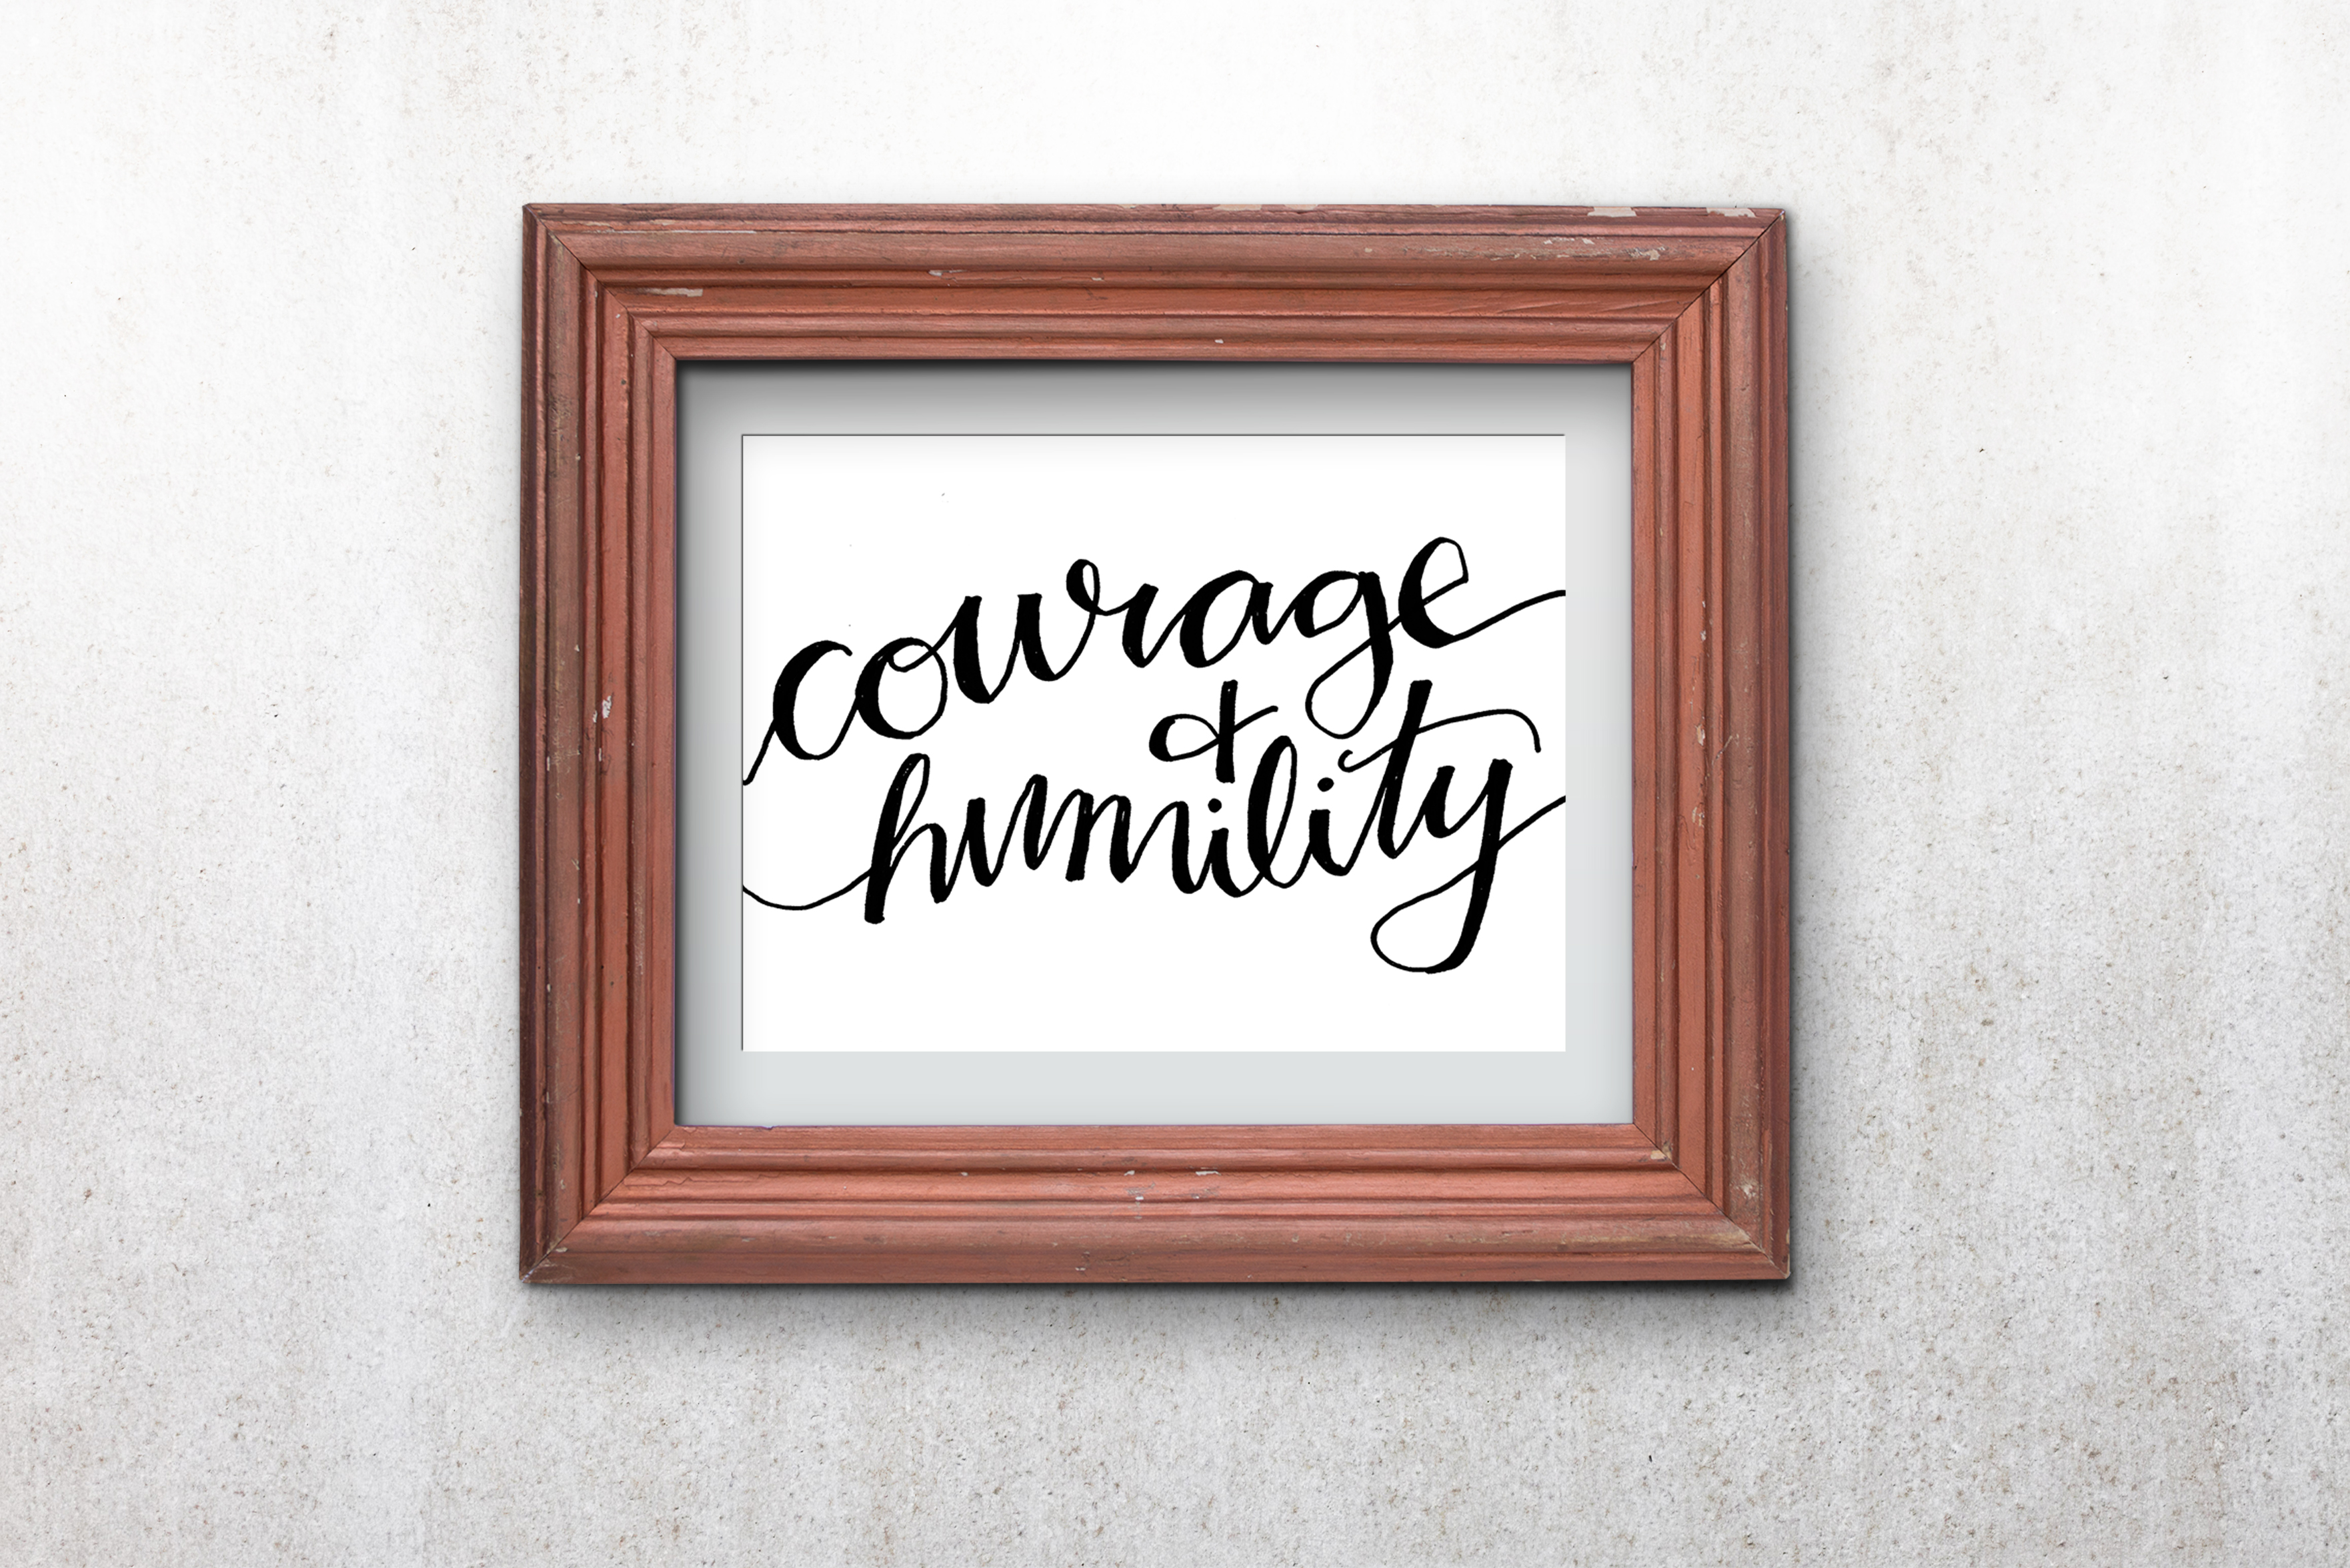 Free Courage and Humility print from JillSimons.com